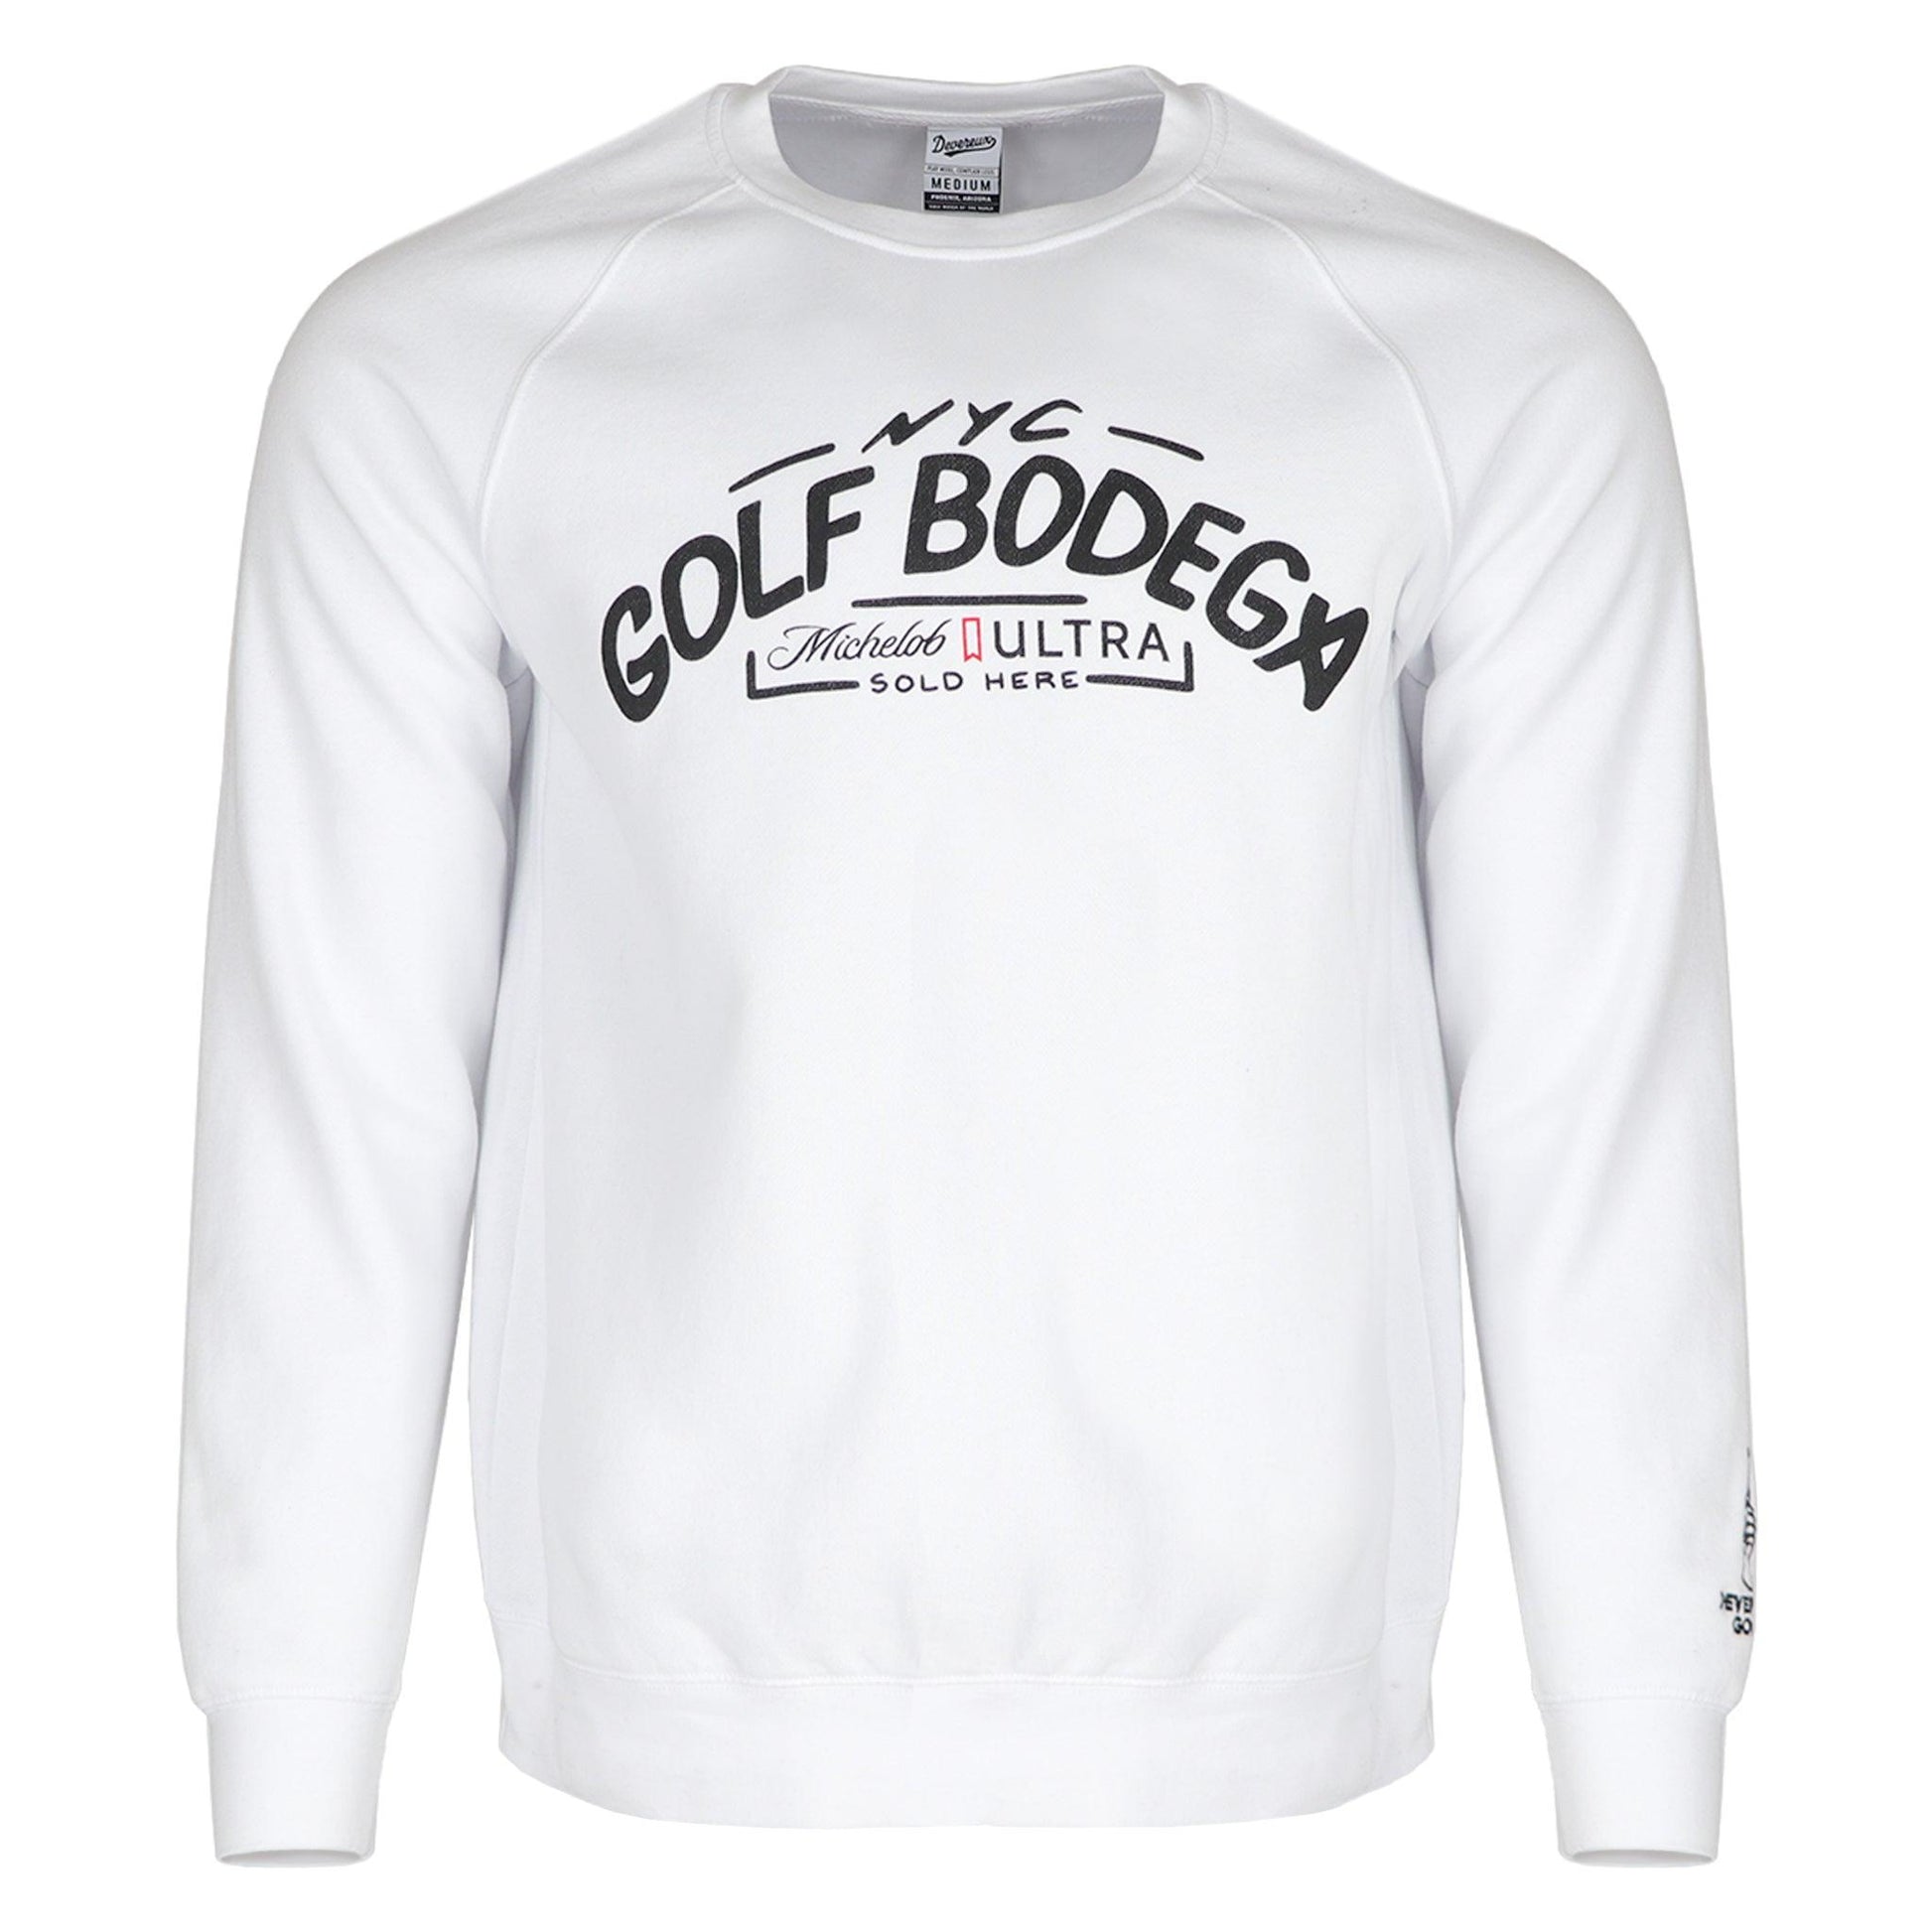 White crewneck that reads NYC Golf Bodega Michelob ULTRA Sold Here on front full chest